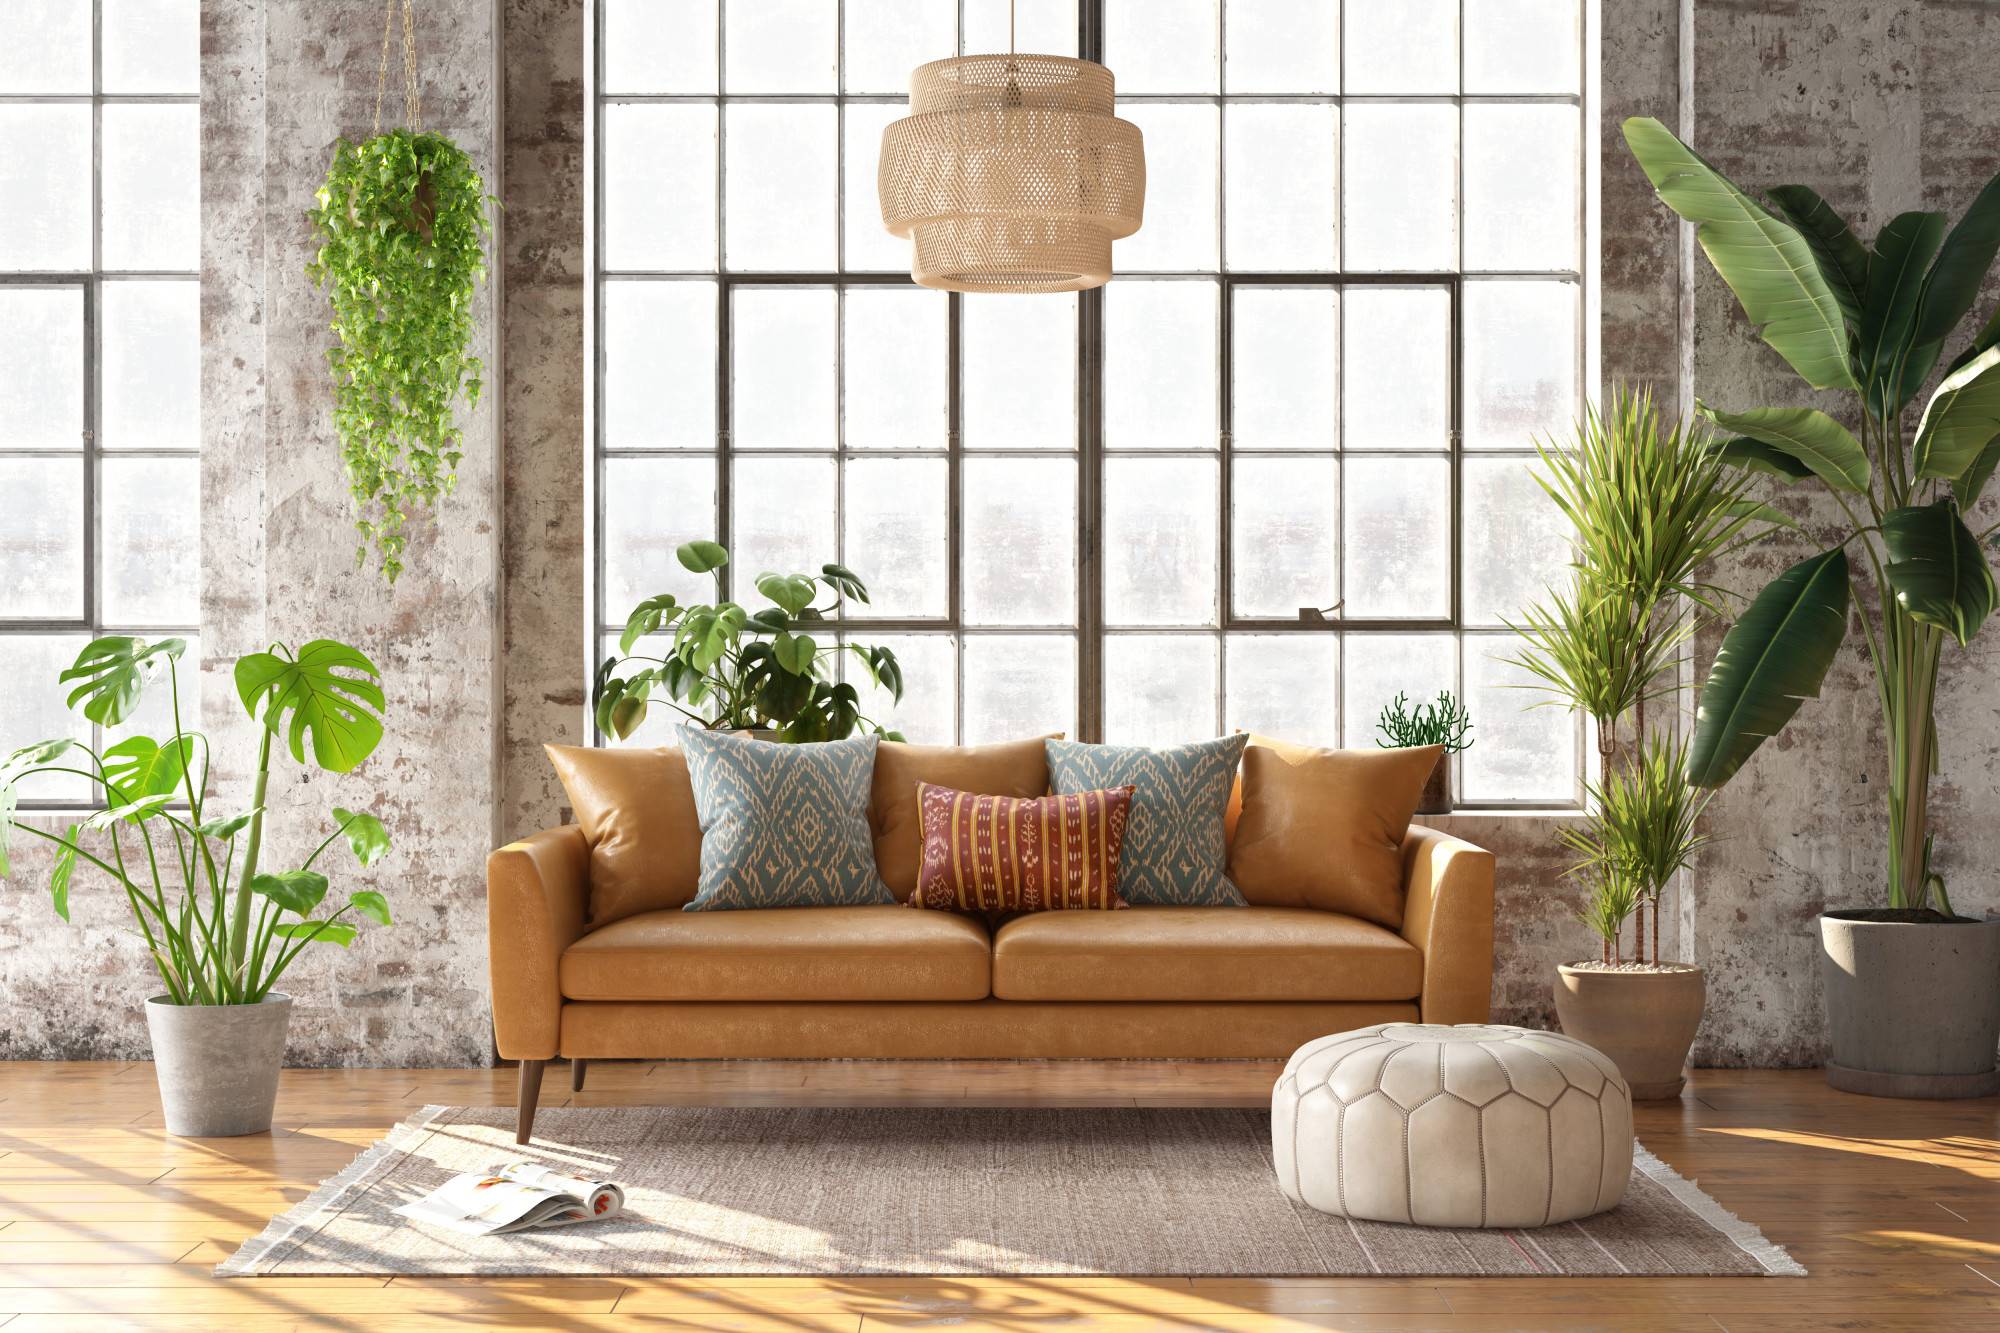 Decorating With Plants: How to Incorporate Plants Into Your Home